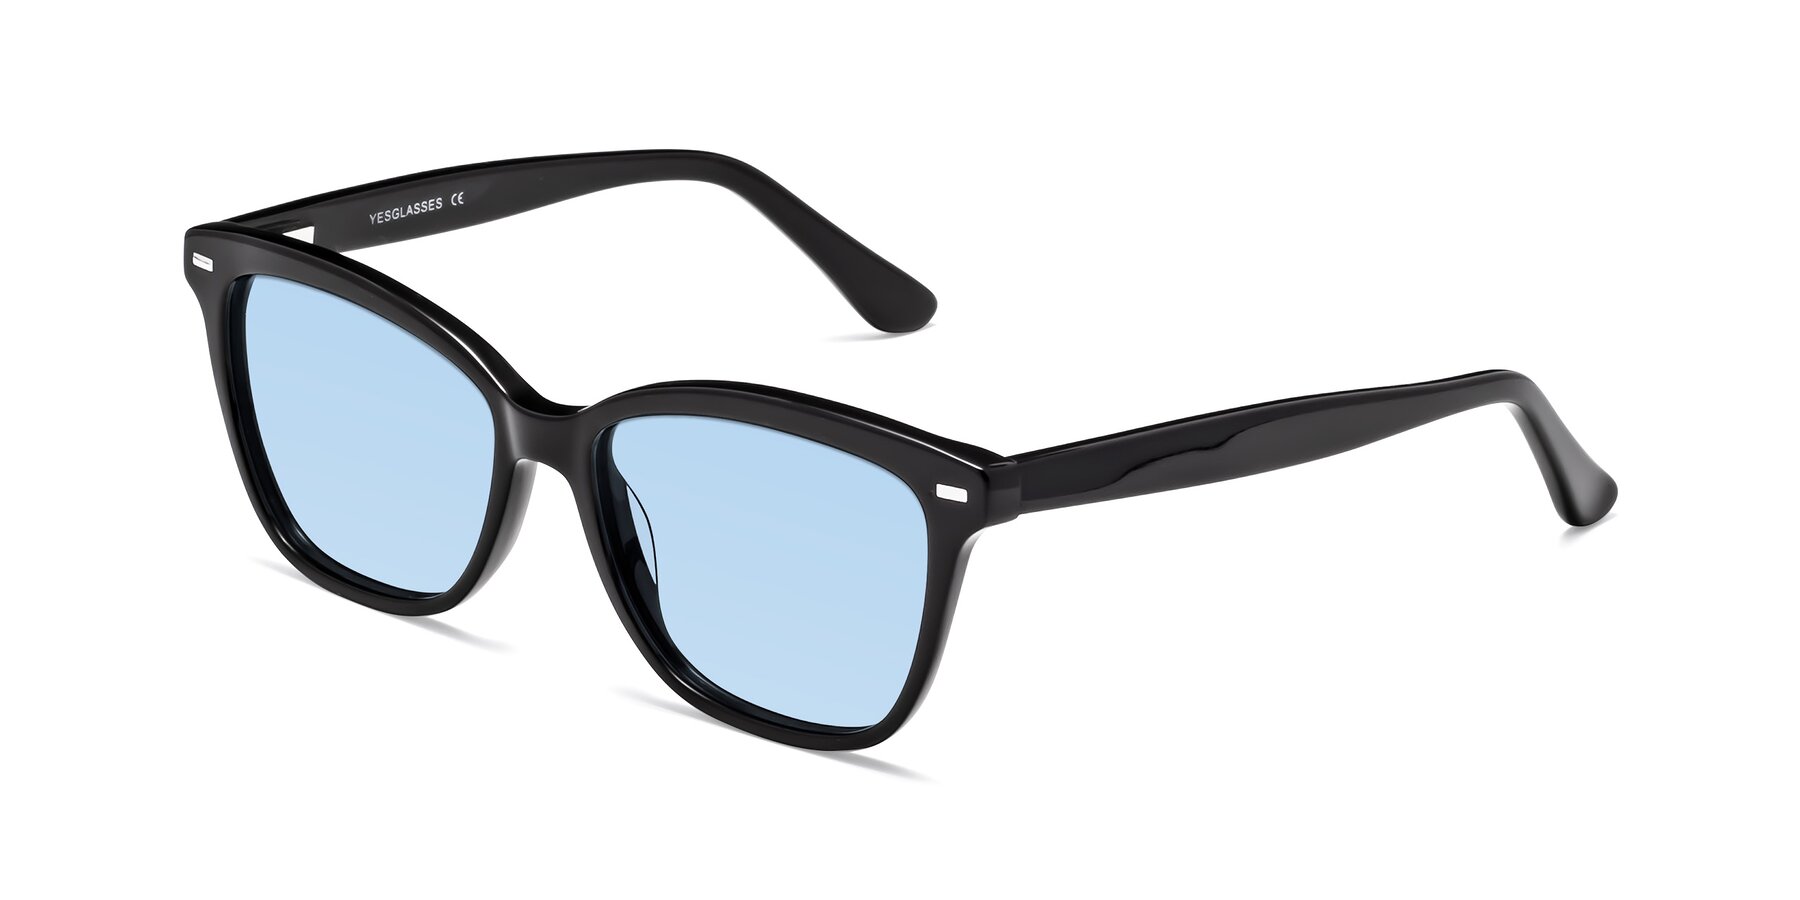 Angle of 17485 in Black with Light Blue Tinted Lenses